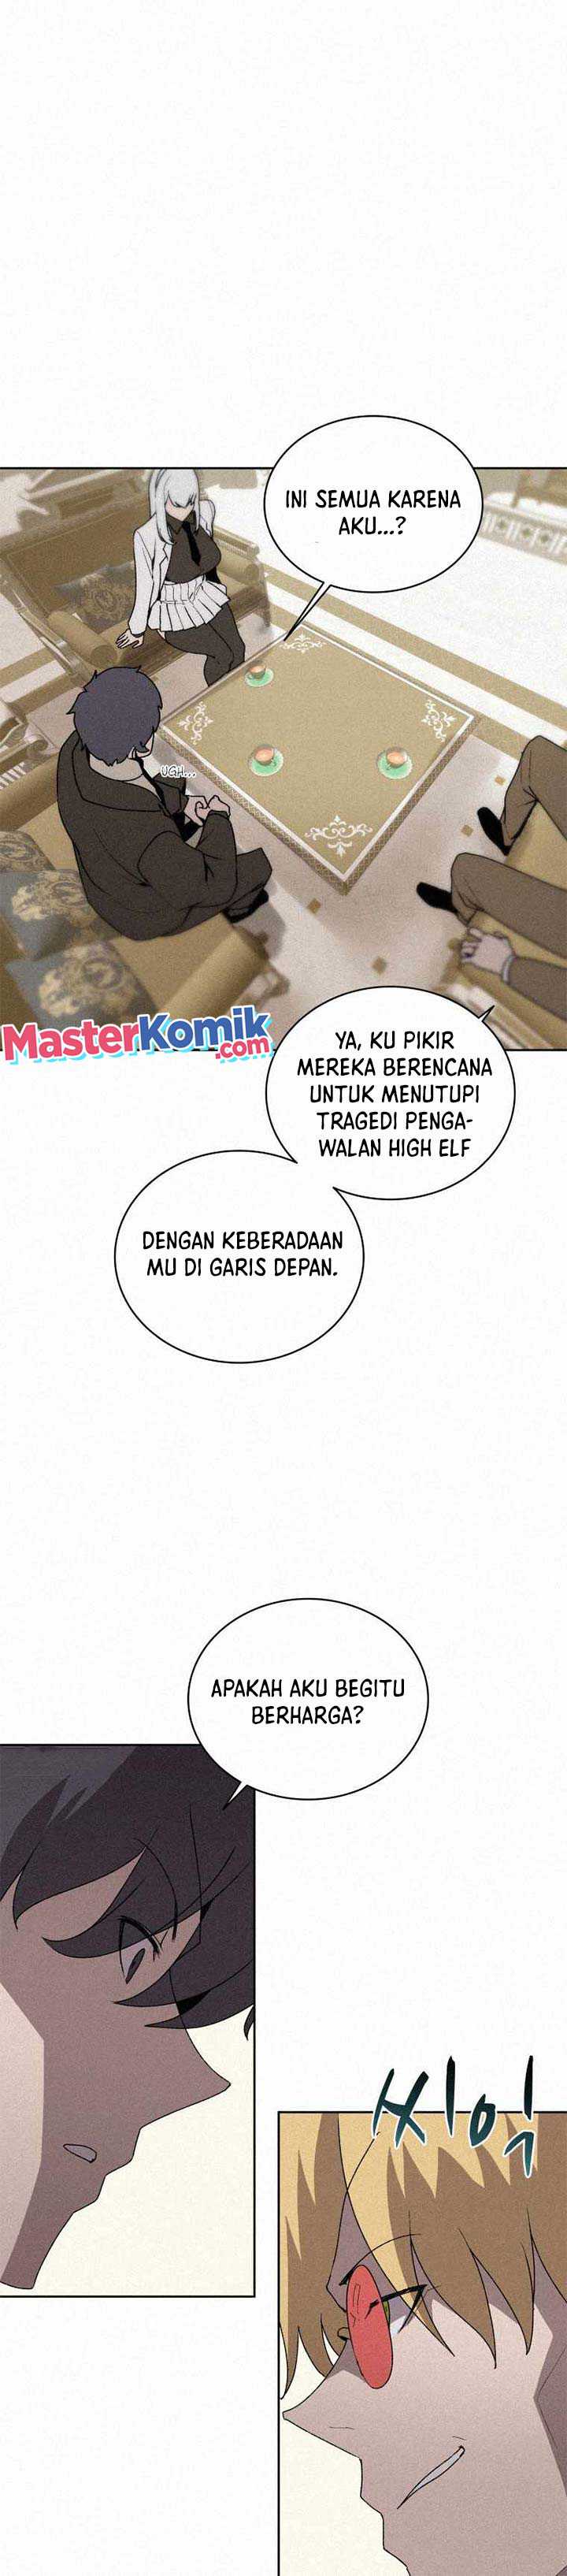 The Book Eating Magician (Book Eater) Chapter 63